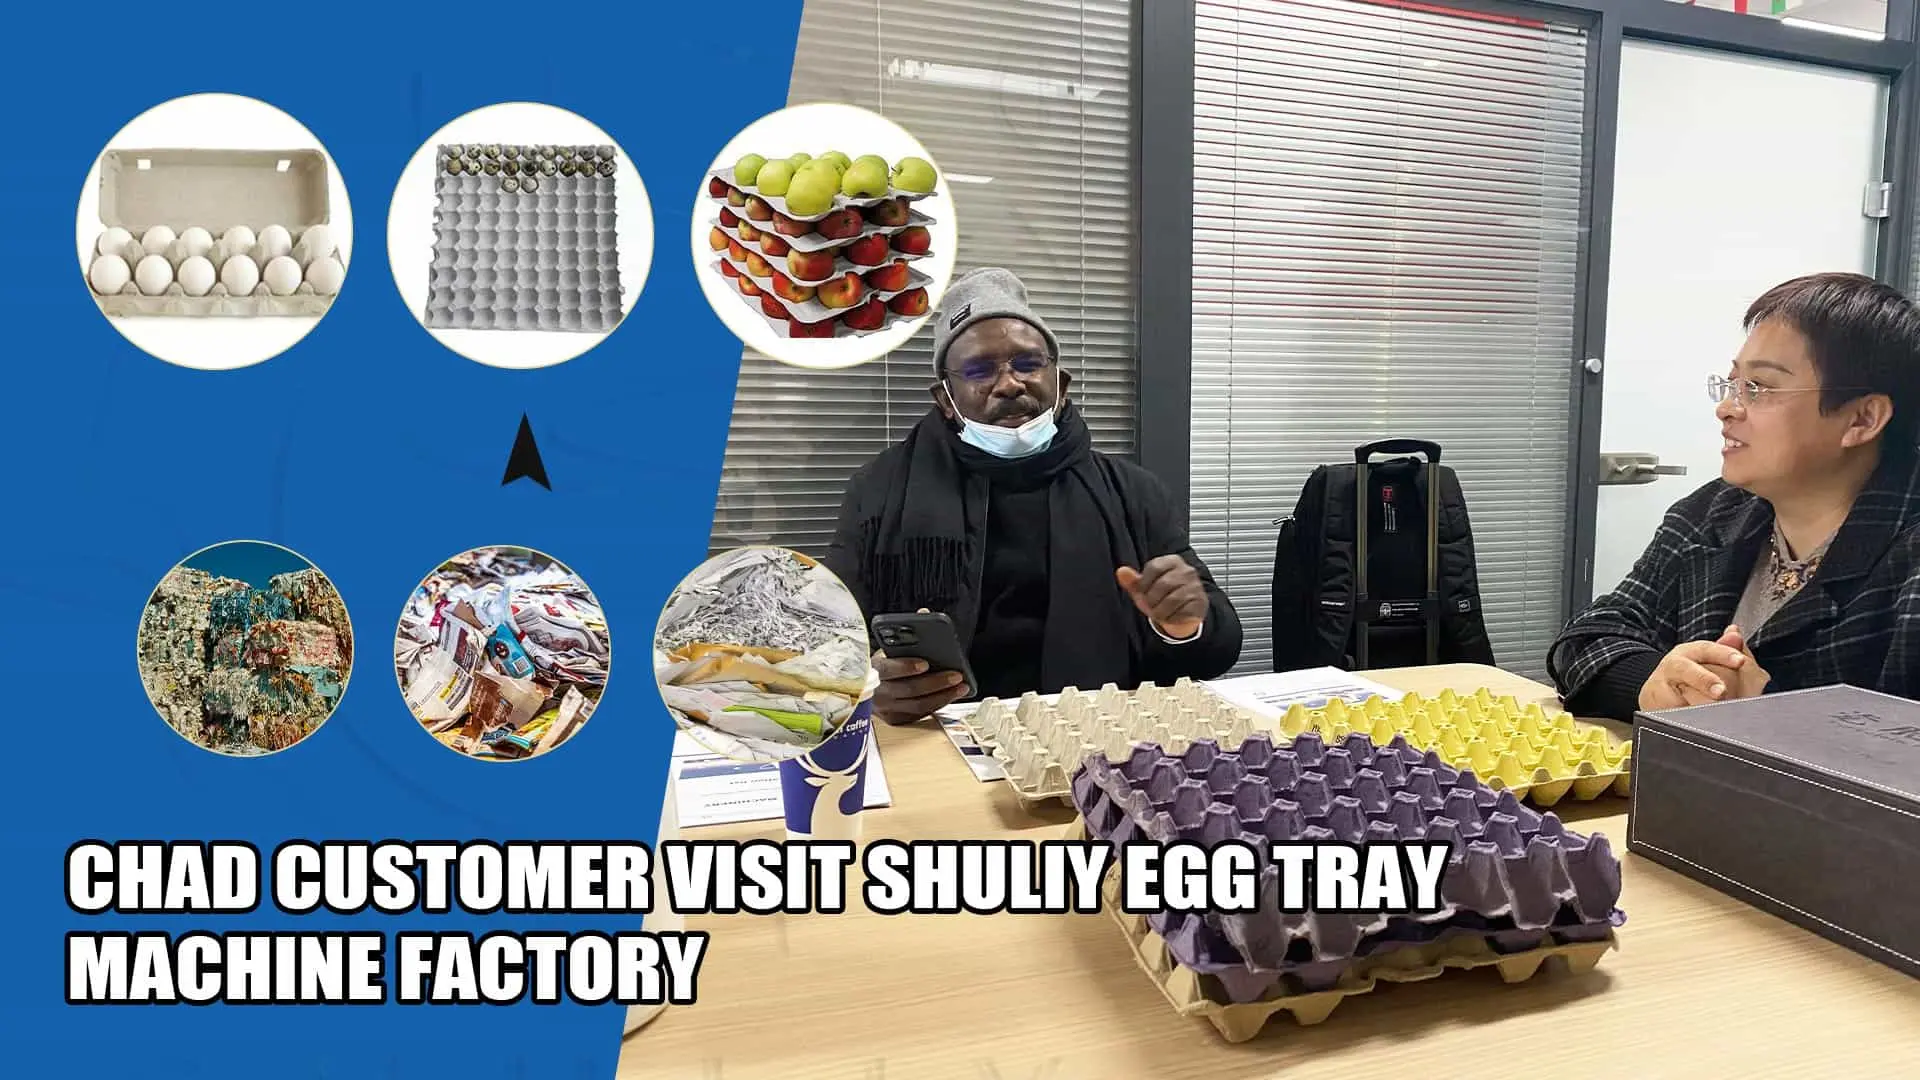 Egg Tray Manufacturing Unit Sold To Chad